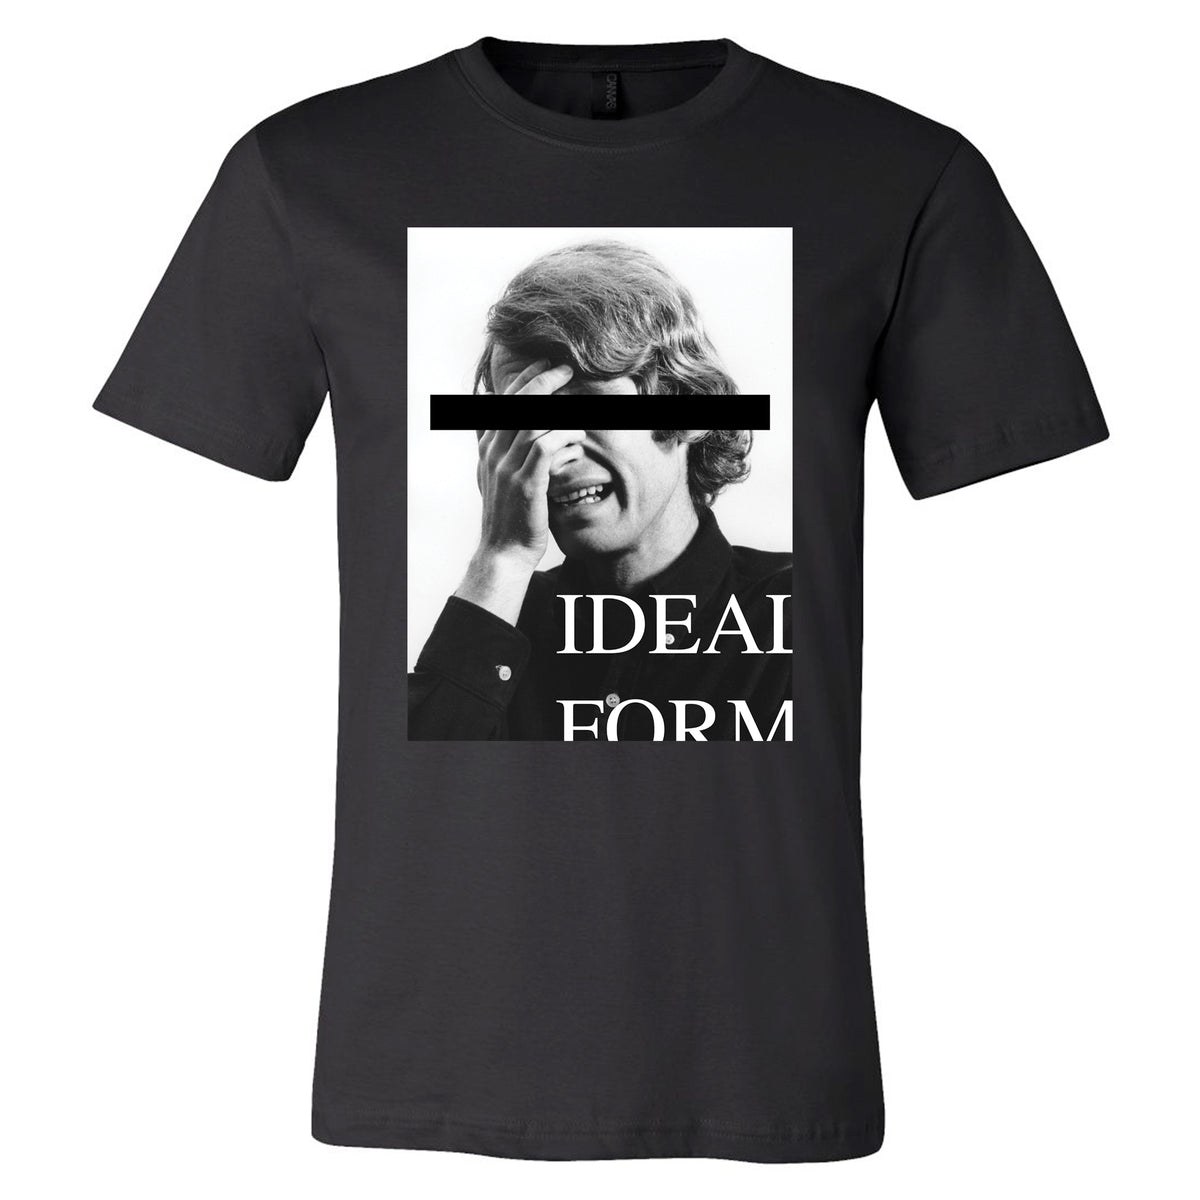 Topographies - "Ideal Form" T-Shirt